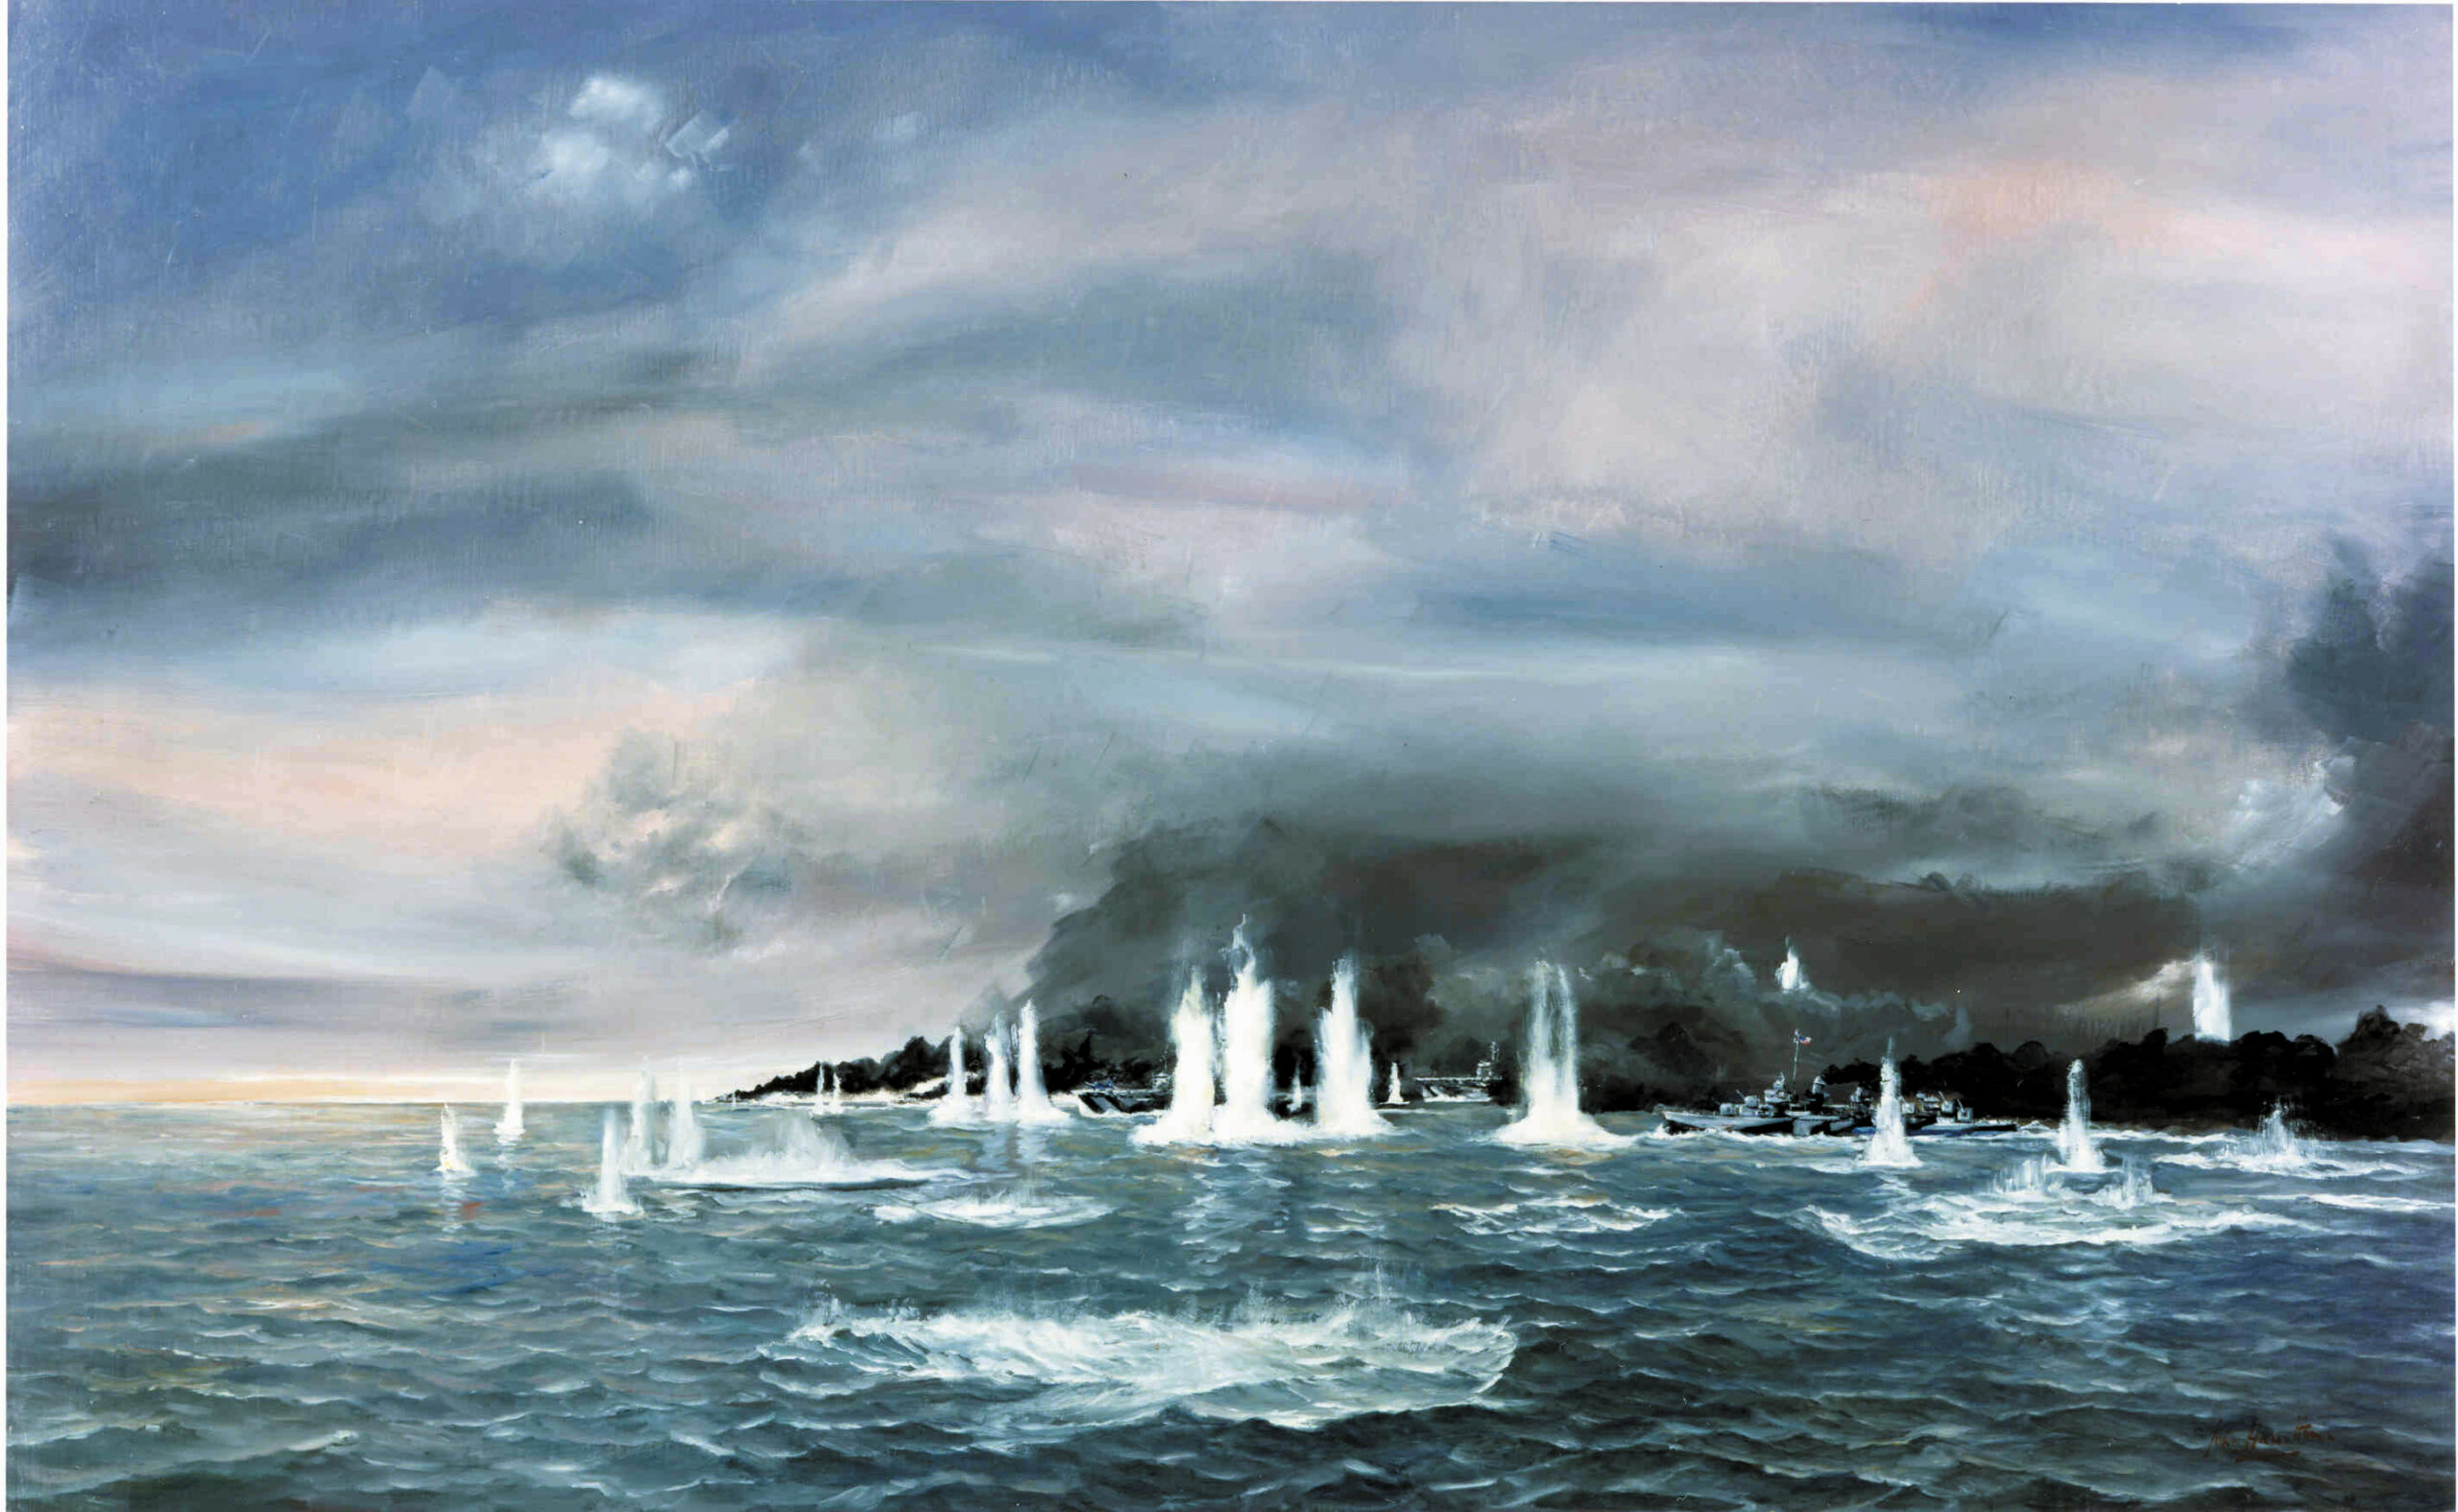 In his painting titled Battle off Samar, artist John Hamilton depicts American warships running a gauntlet of Japanese shellfire during the heroic effort to defend the beaches on the Philippine island of Leyte.